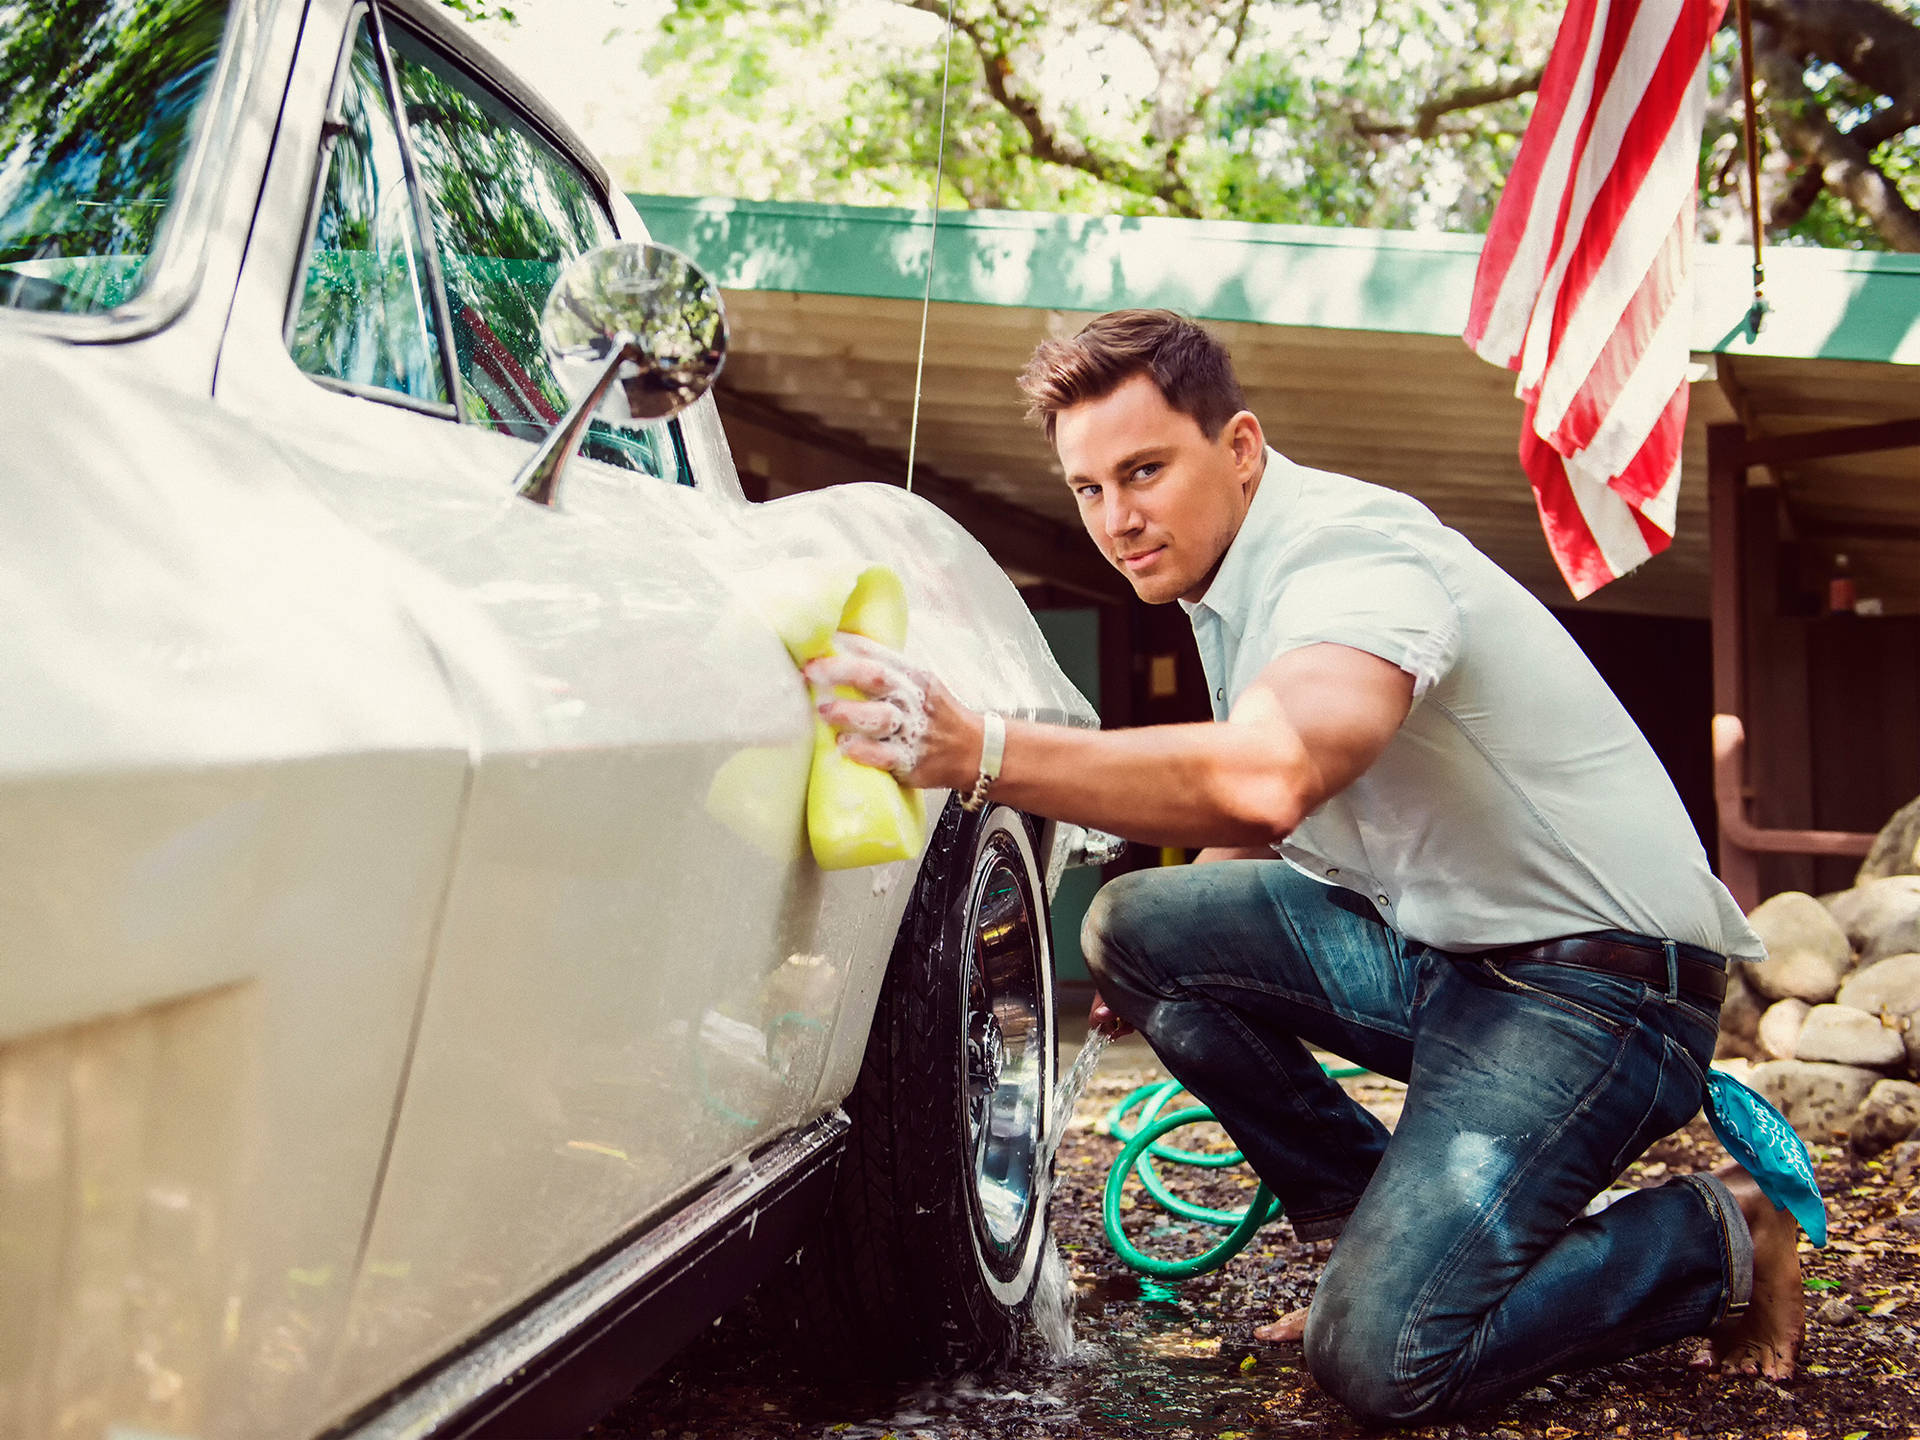 Channing Tatum With Vintage Car Background